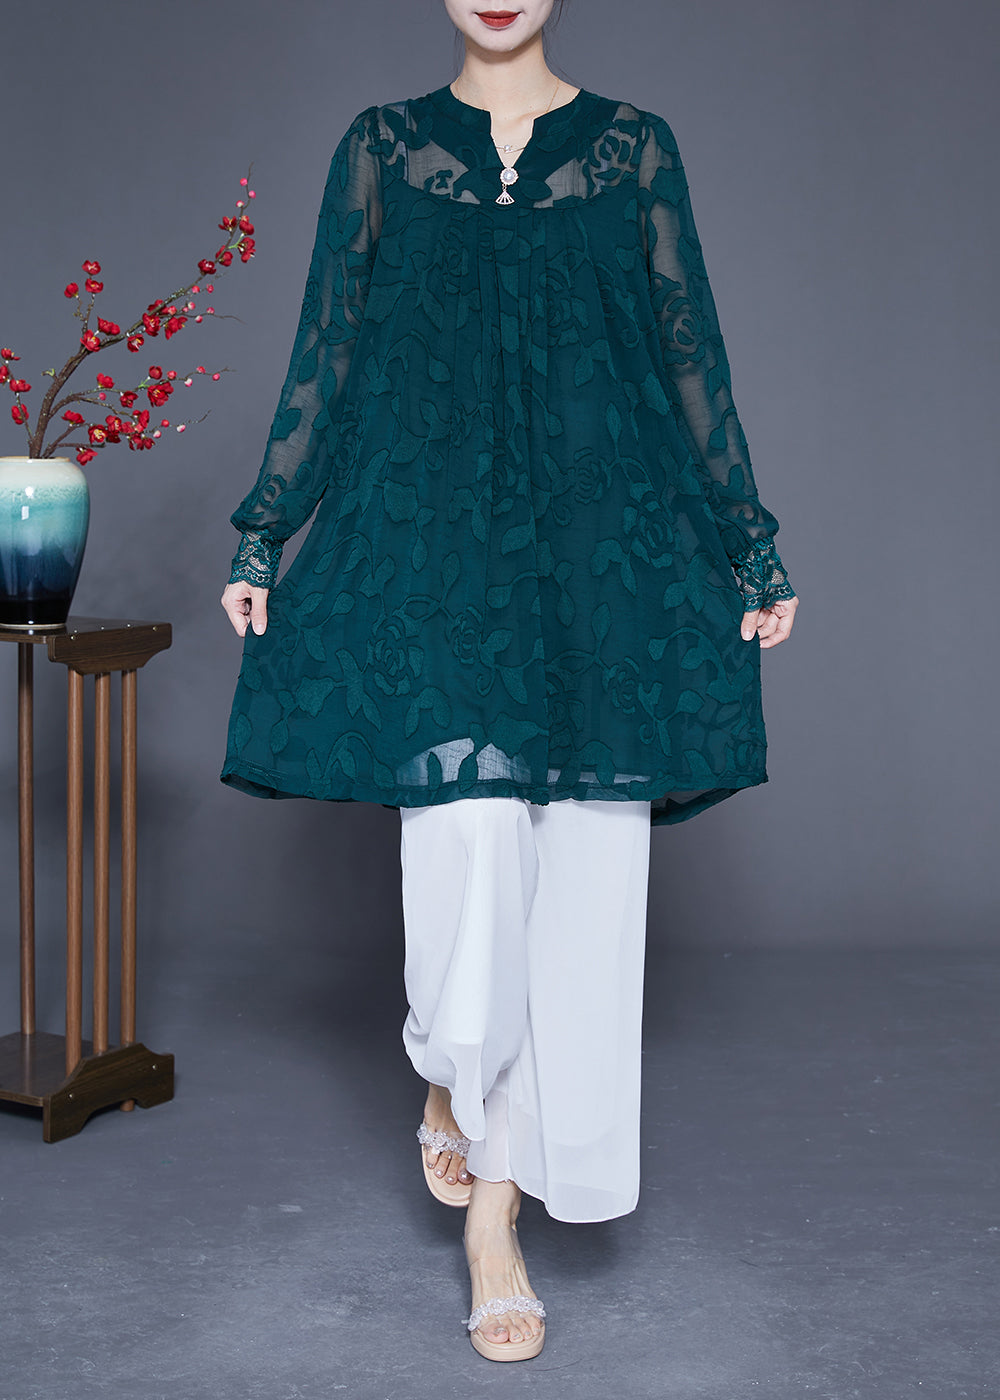 Casual Peacock Green Jacquard Hollow Out Tulle Dress Long Sleeve LY2879